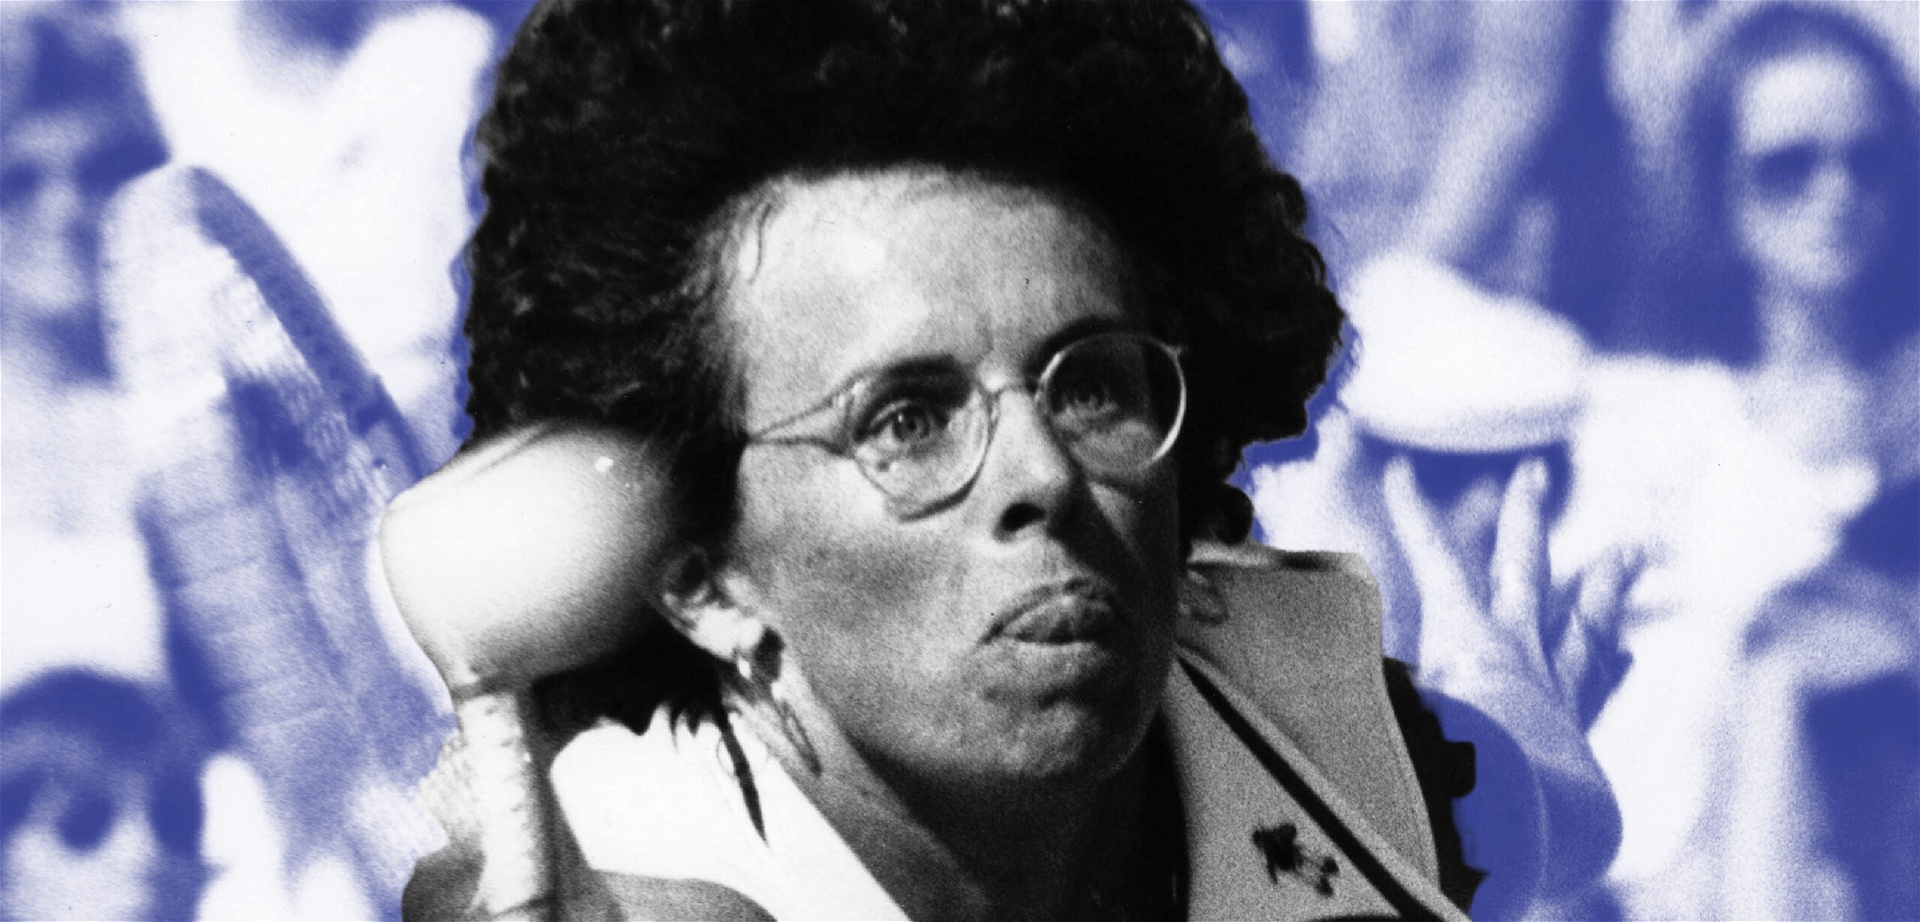 Billie Jean King, On this day 12.06.2021